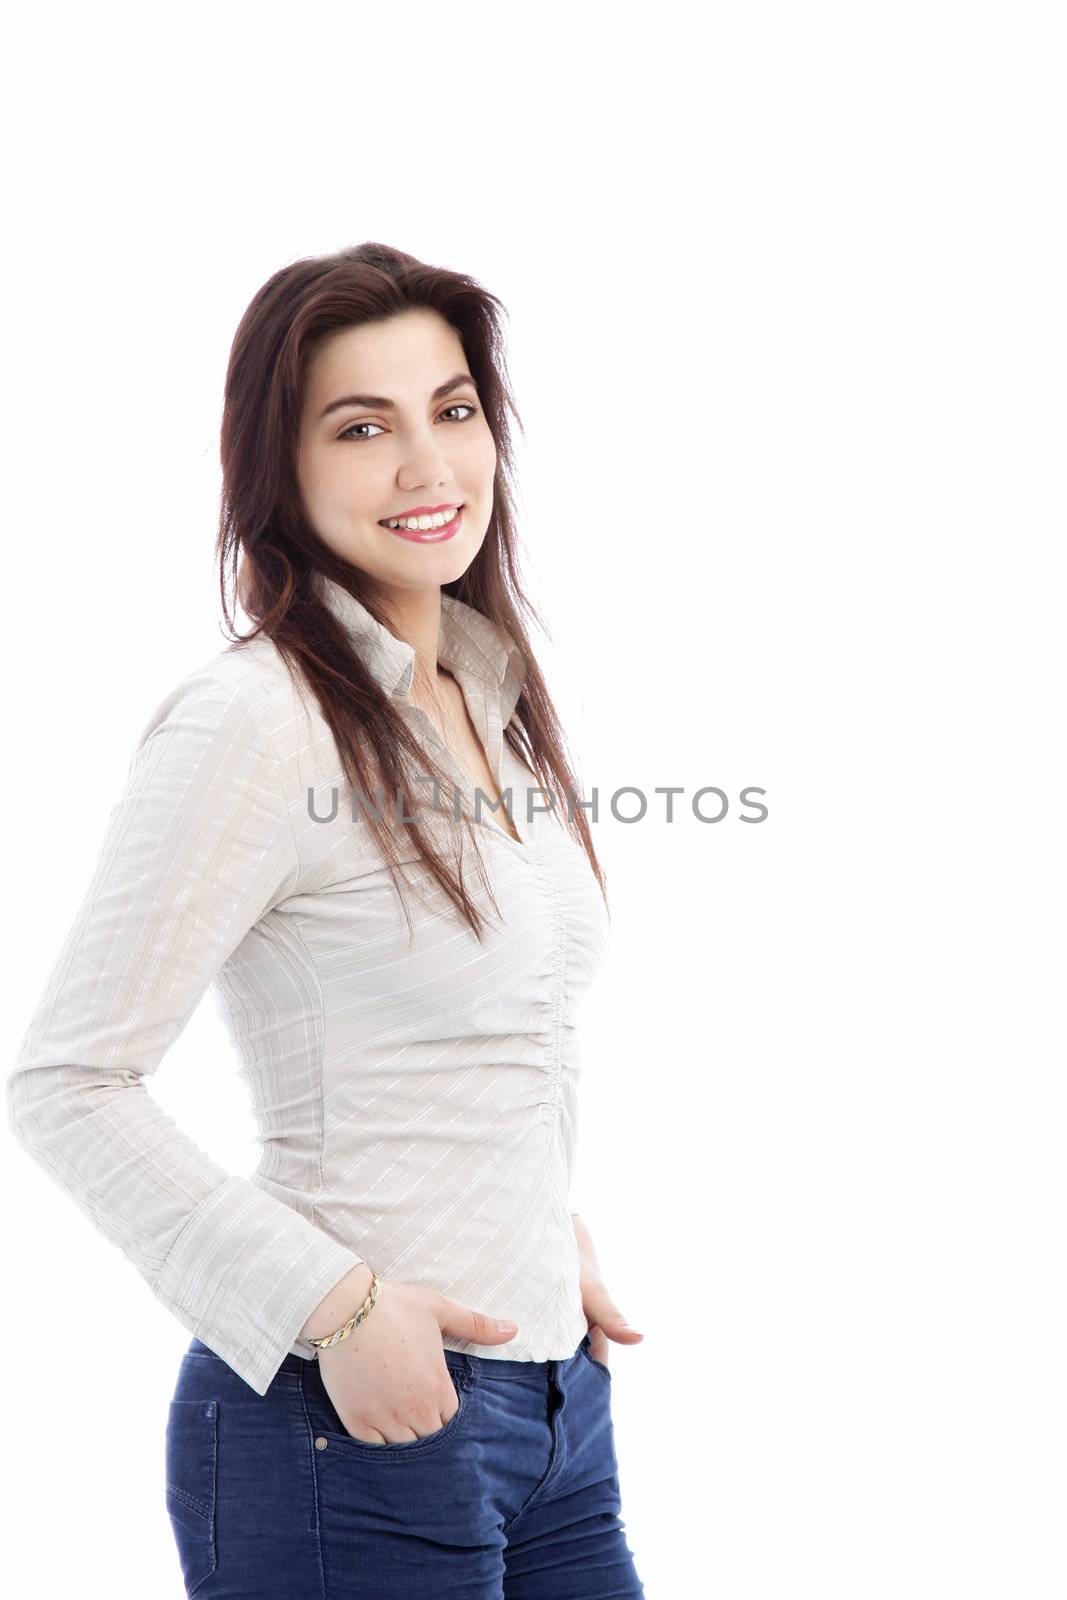 Smiling casual woman in jeans standing with her hands in her pockets smiling at the camera isolated on white